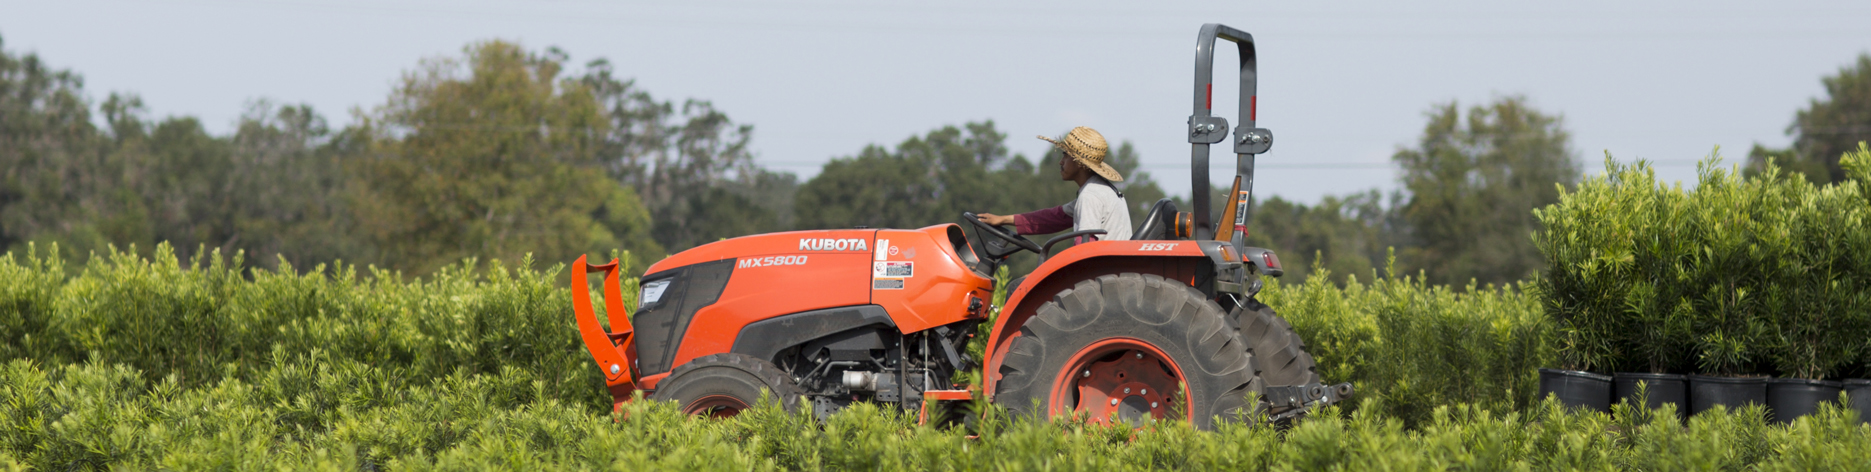 worker on tractor in ag field